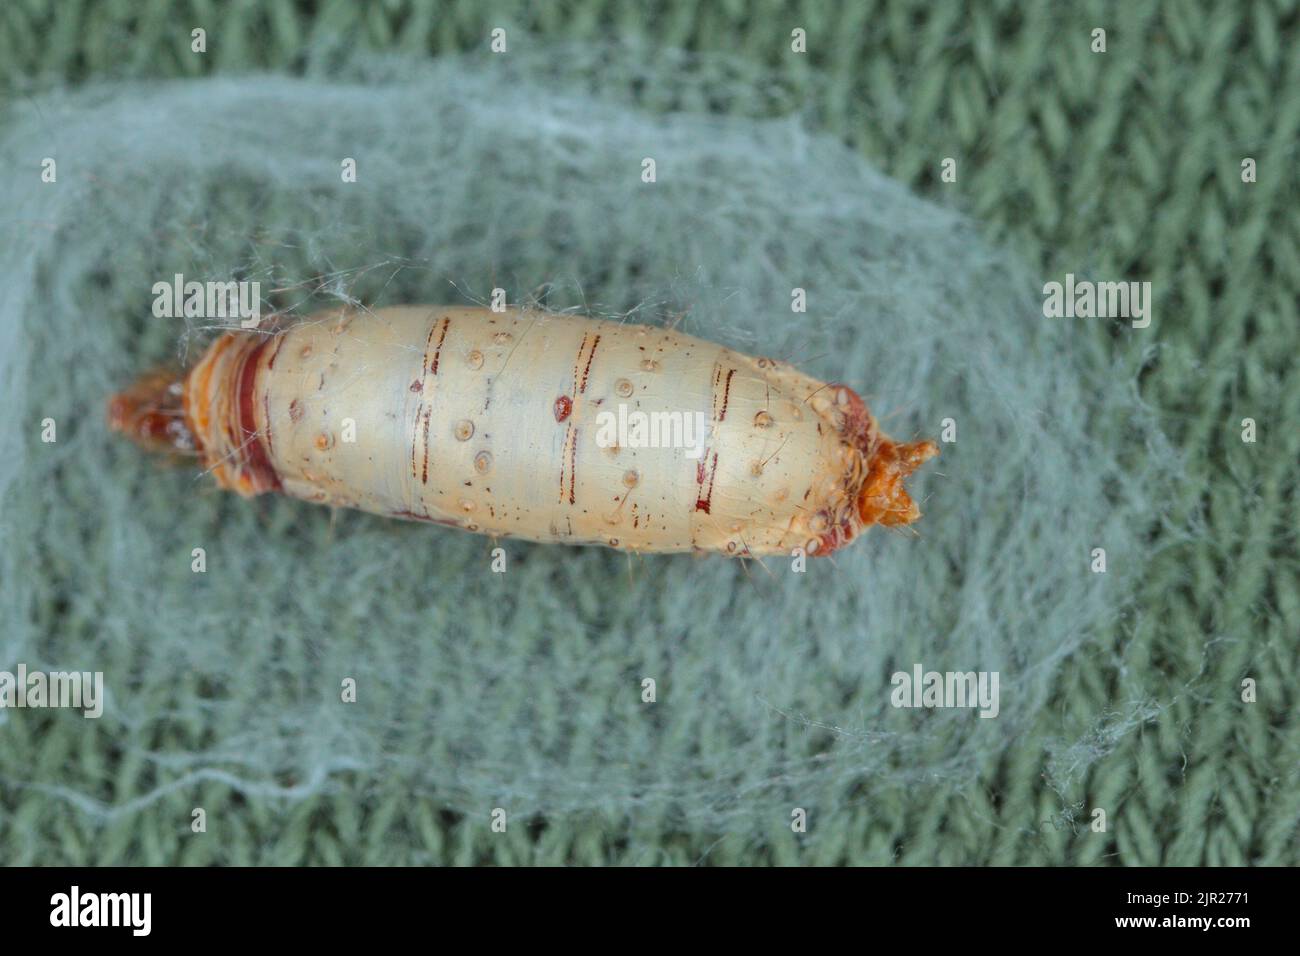 The cocoon, pupa of an insect of the order of flies. Stock Photo